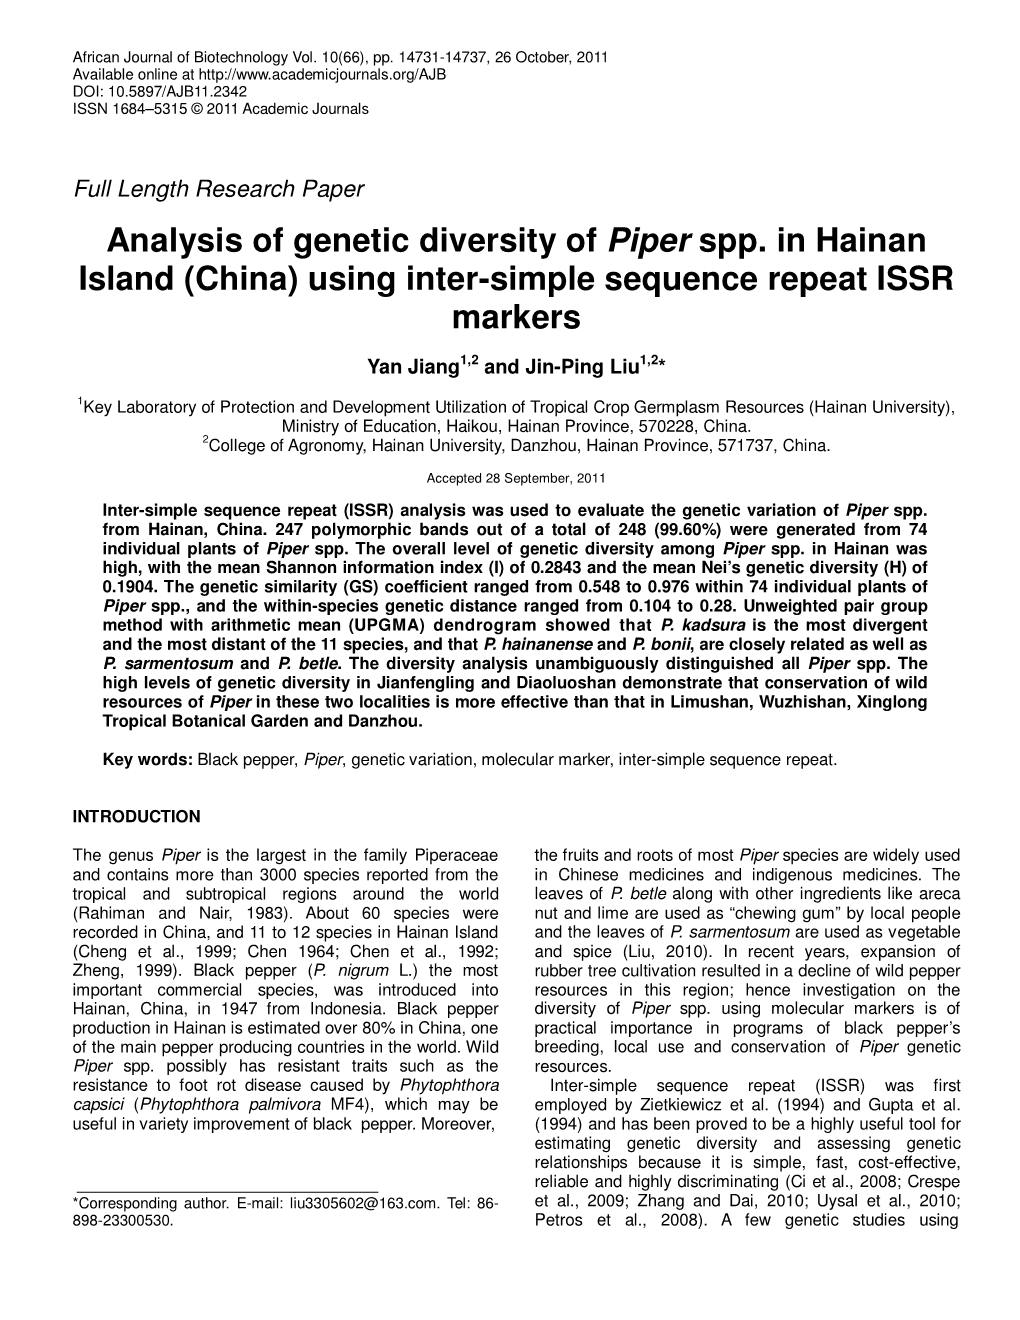 Analysis of Genetic Diversity of Piper Spp. in Hainan Island (China) Using Inter-Simple Sequence Repeat ISSR Markers